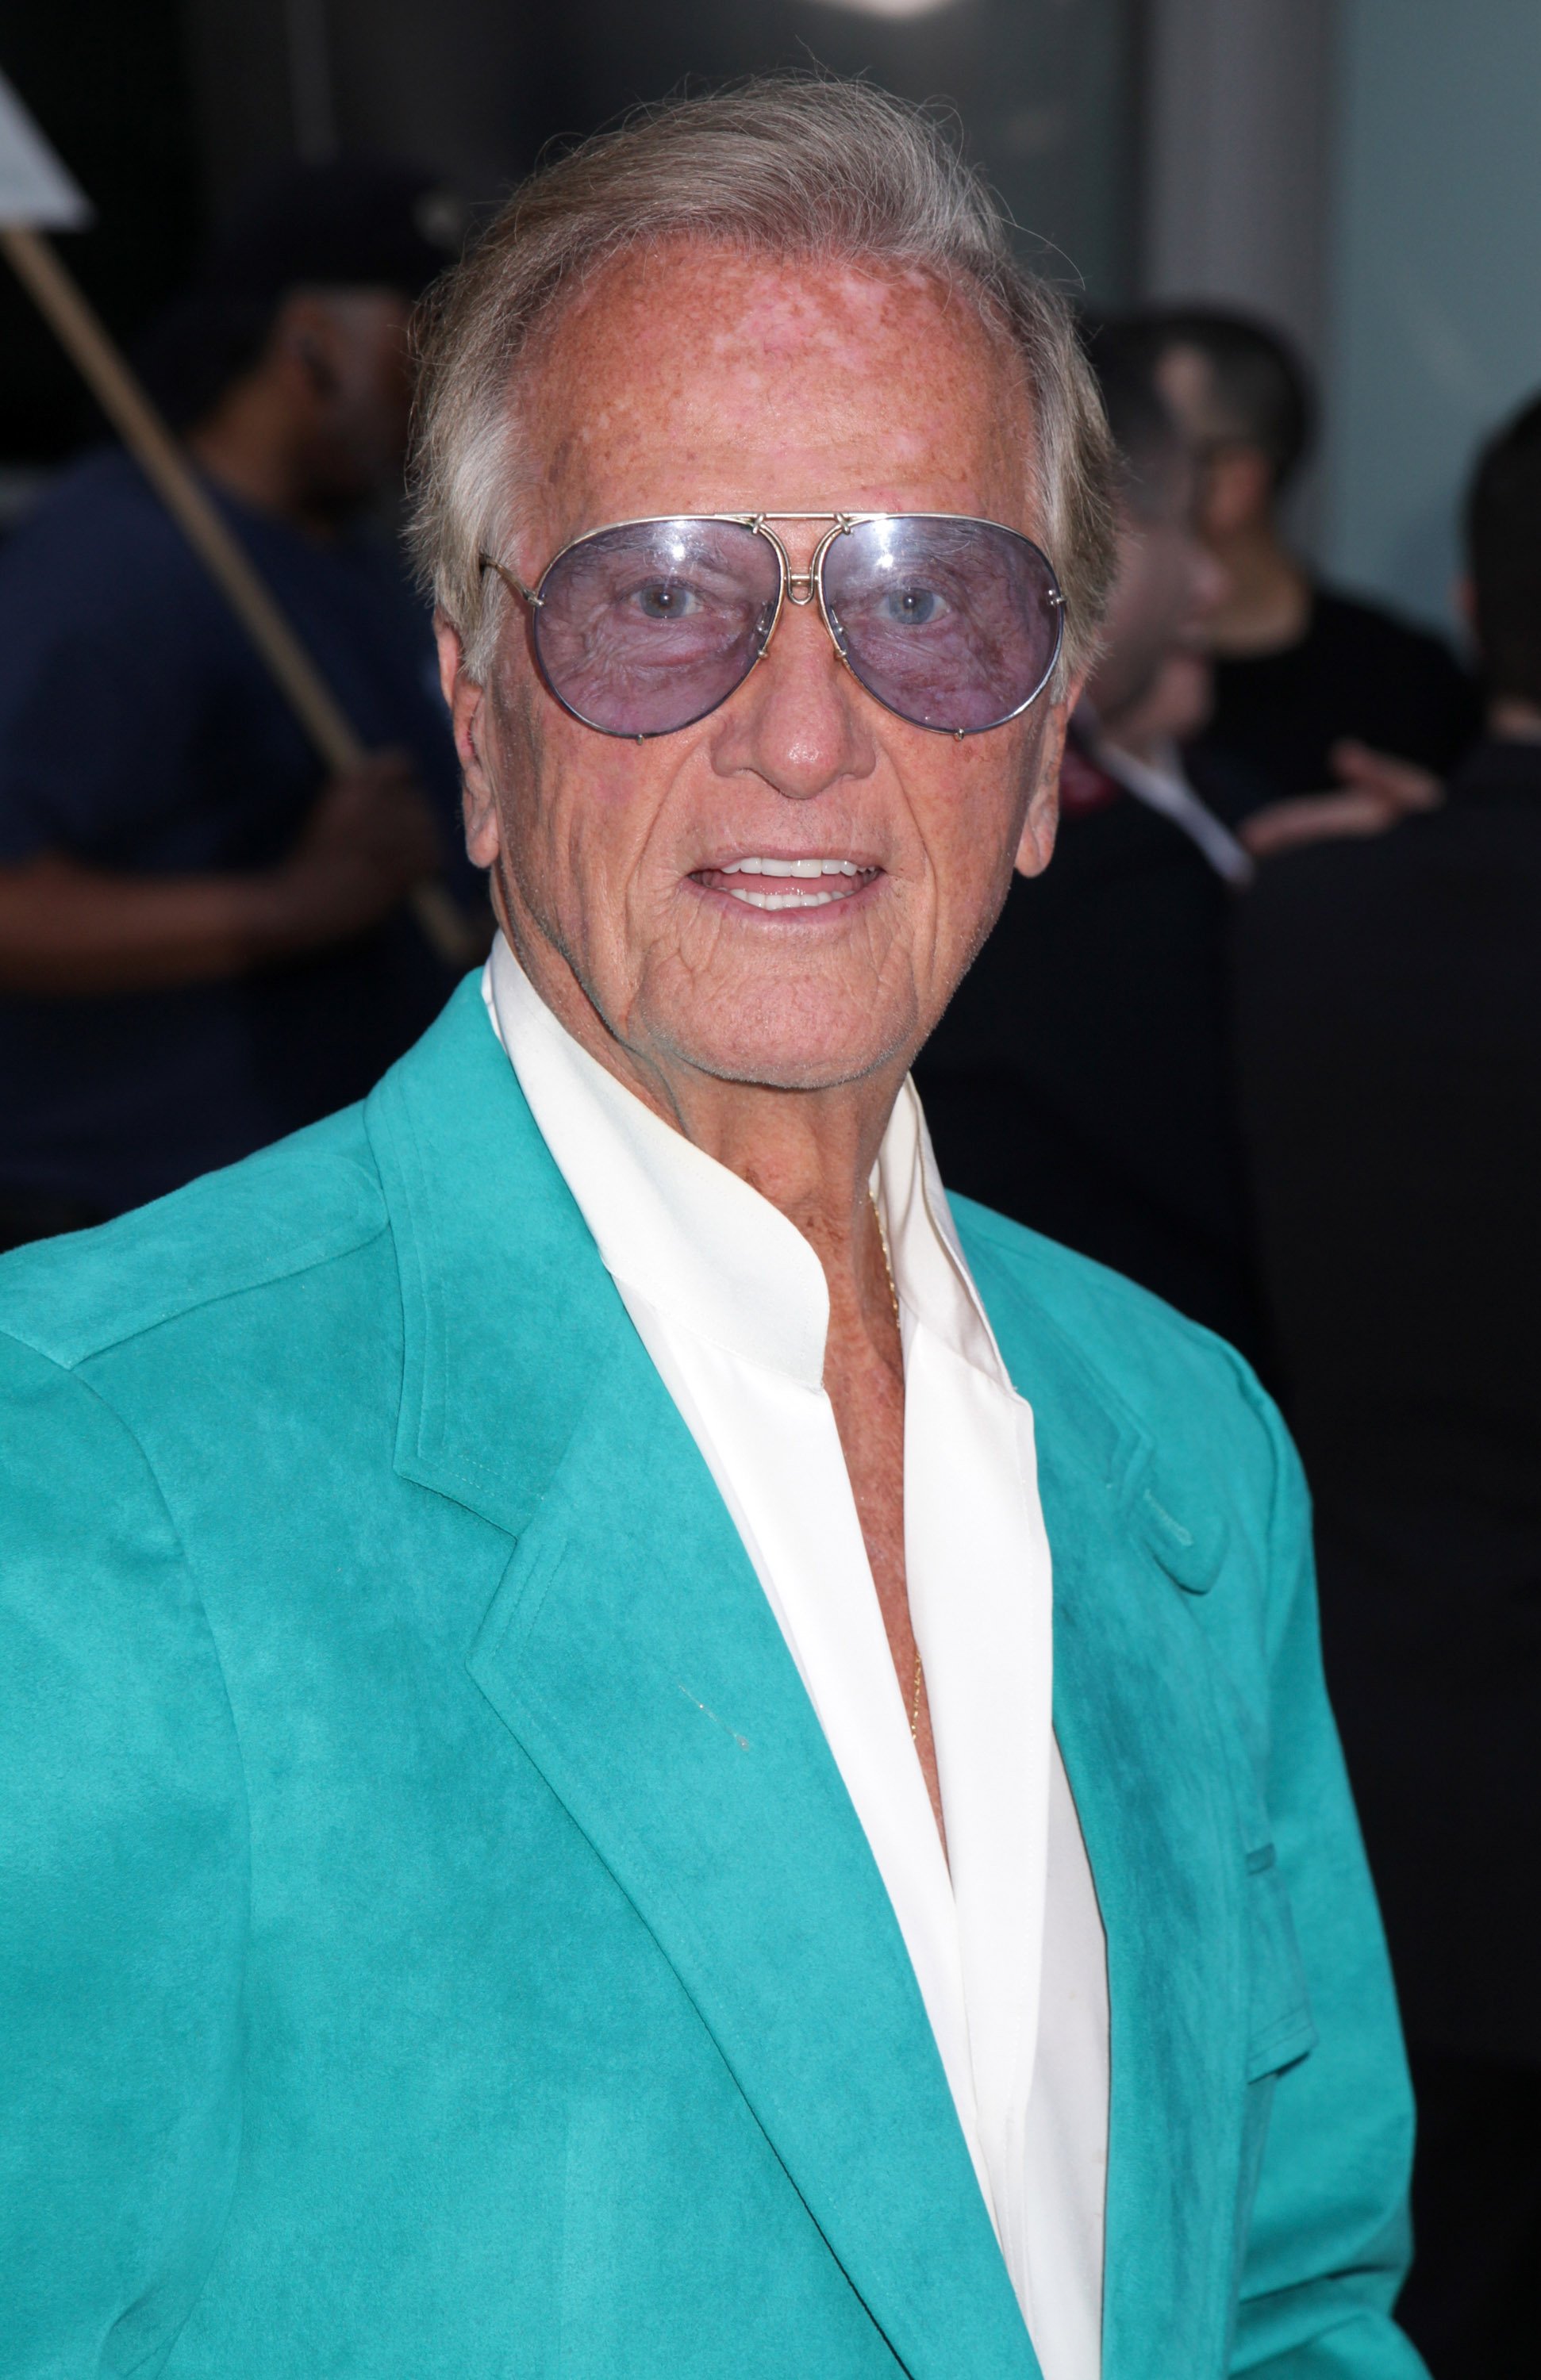 Singer Pat Boone attends "Do You Believe?" Los Angeles Premiere at ArcLight Hollywood on March 16, 2015 in Hollywood, California. | Source: Getty Images